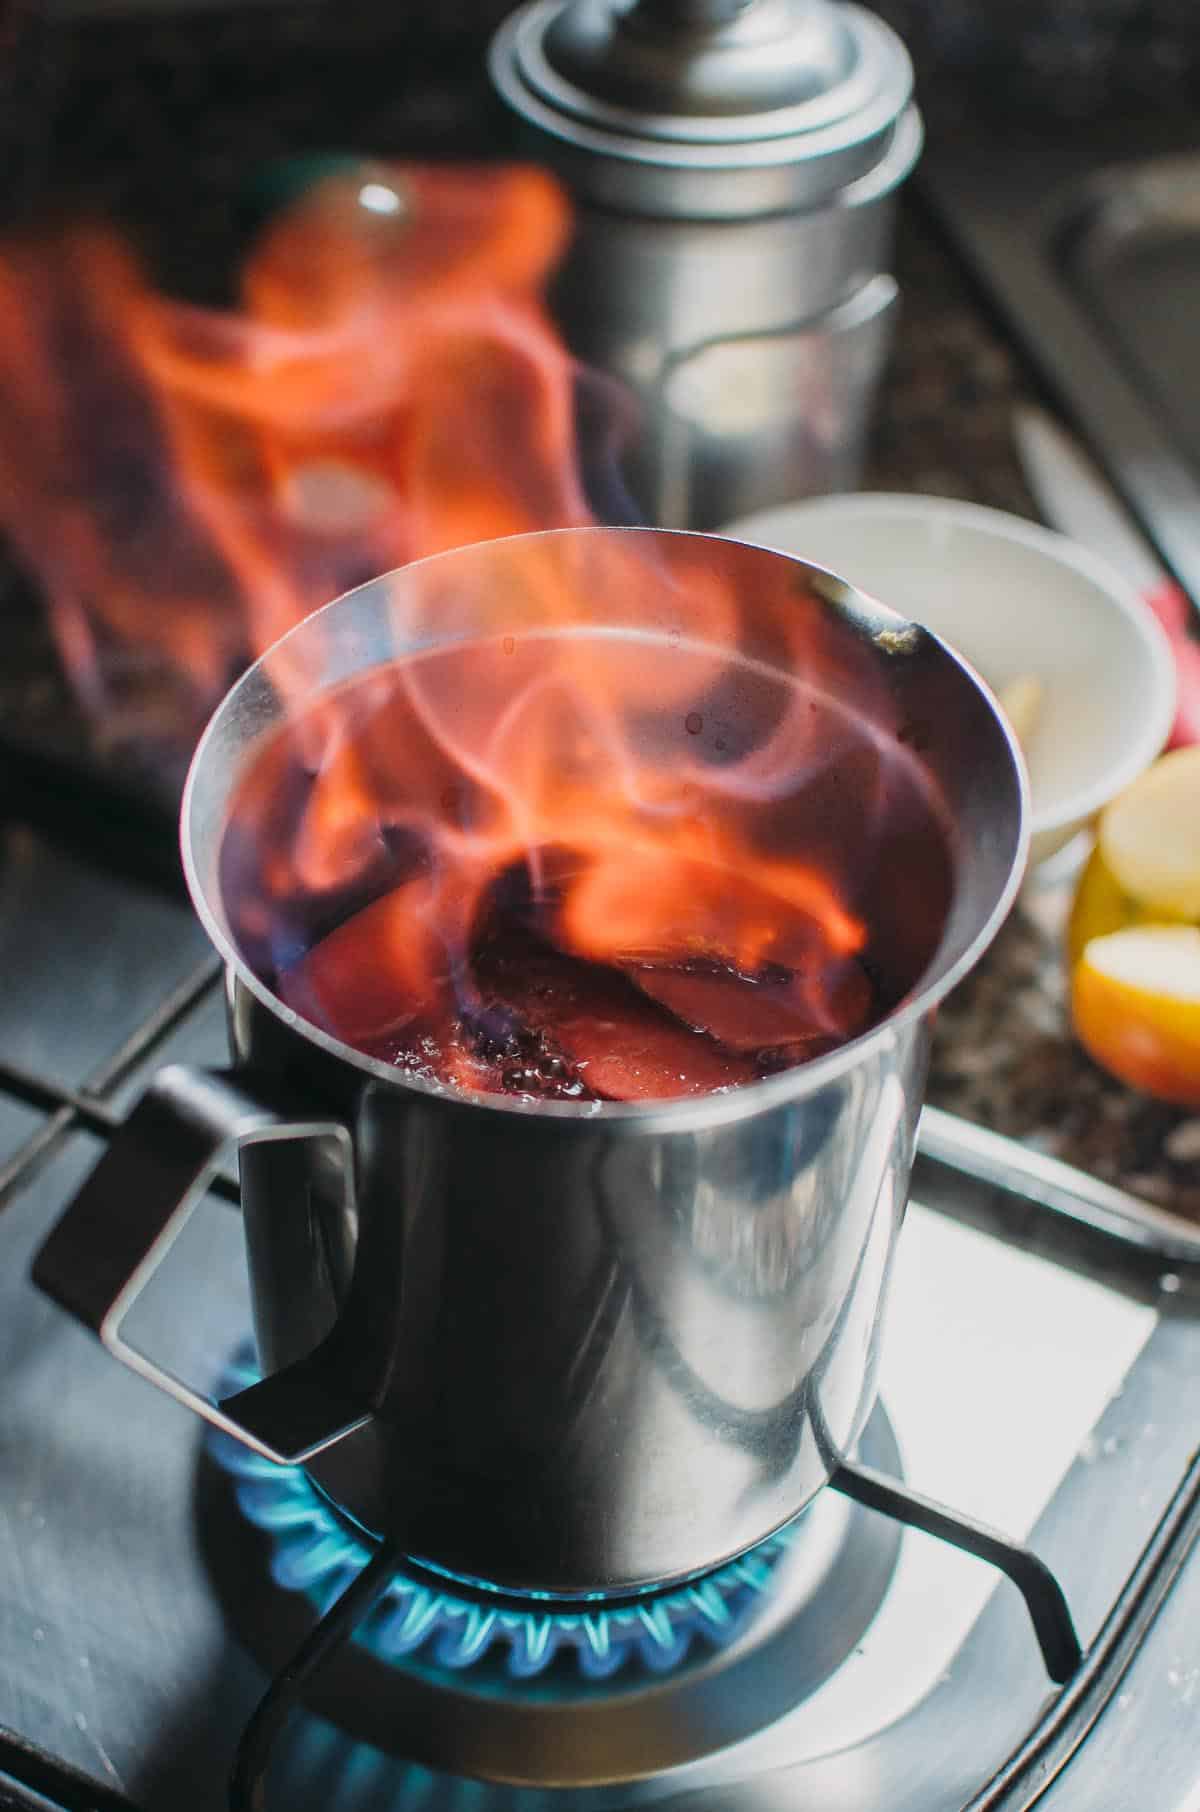 This soul-soothing Vin Brule' (Italian mulled wine) is simply made with wine, sugar, cinnamon, apples, and cloves. | Very EATalian